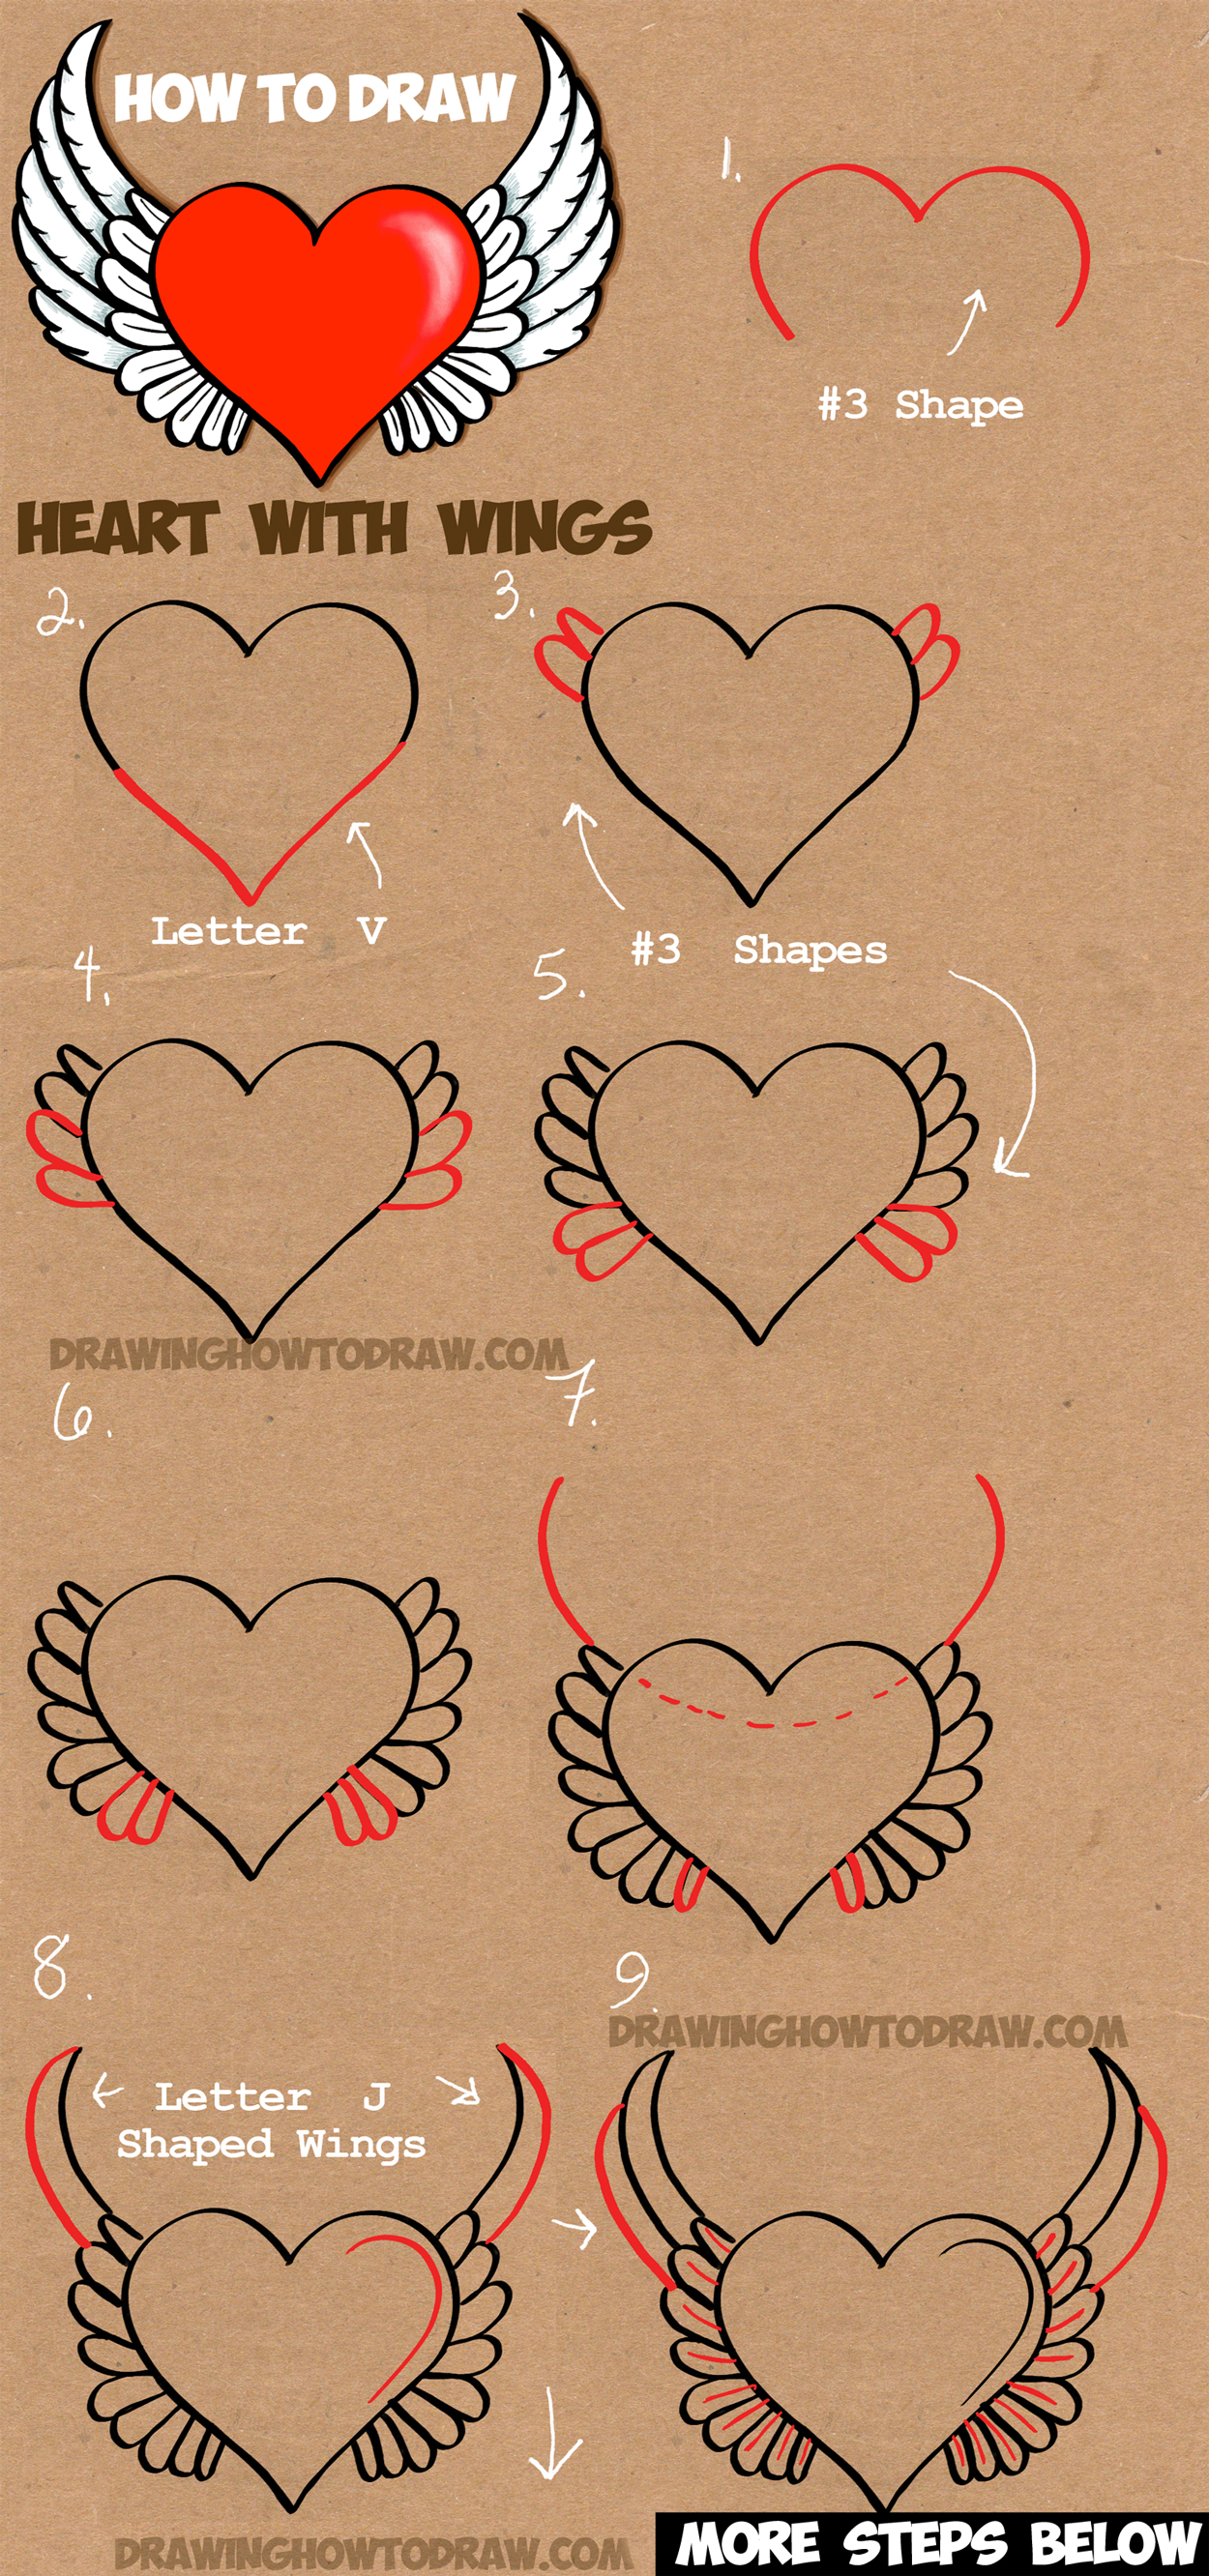 Great How To Draw A Heart With Wings of all time Learn more here 